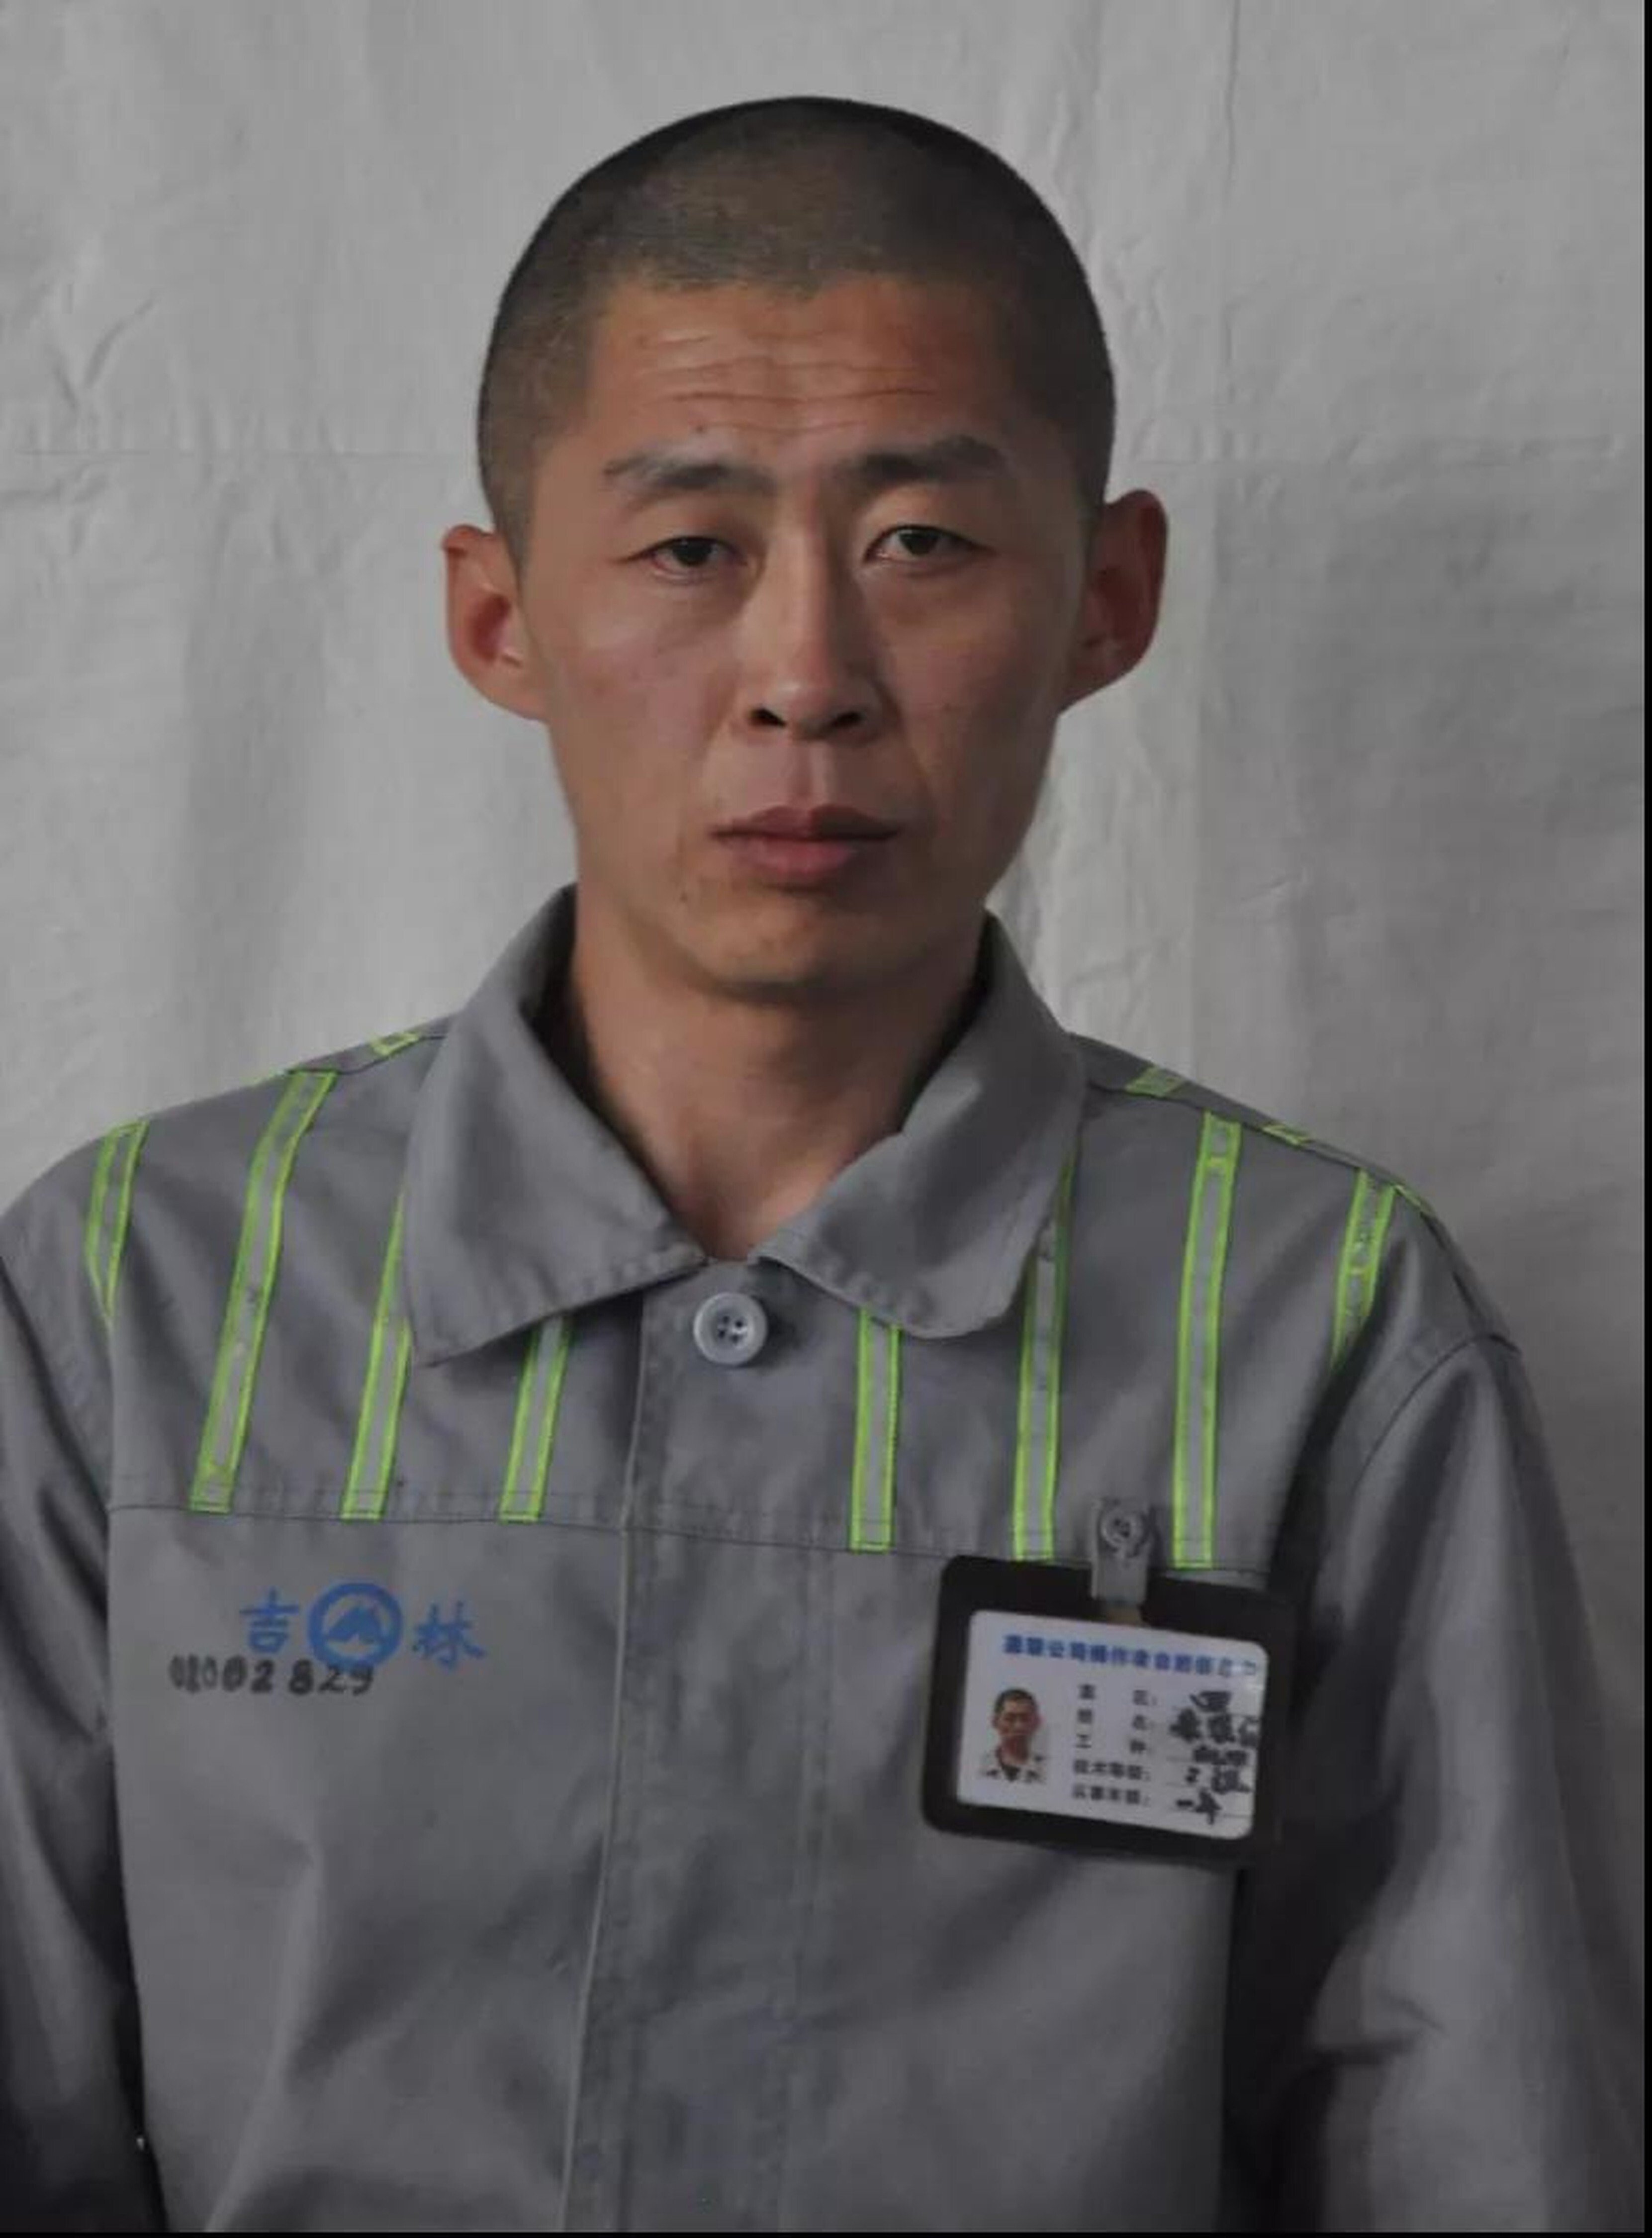 After crossing the border from North Korea into China in 2013, Zhu Xianjian carried out a series of crimes, including stabbing a woman. Credit: Handout